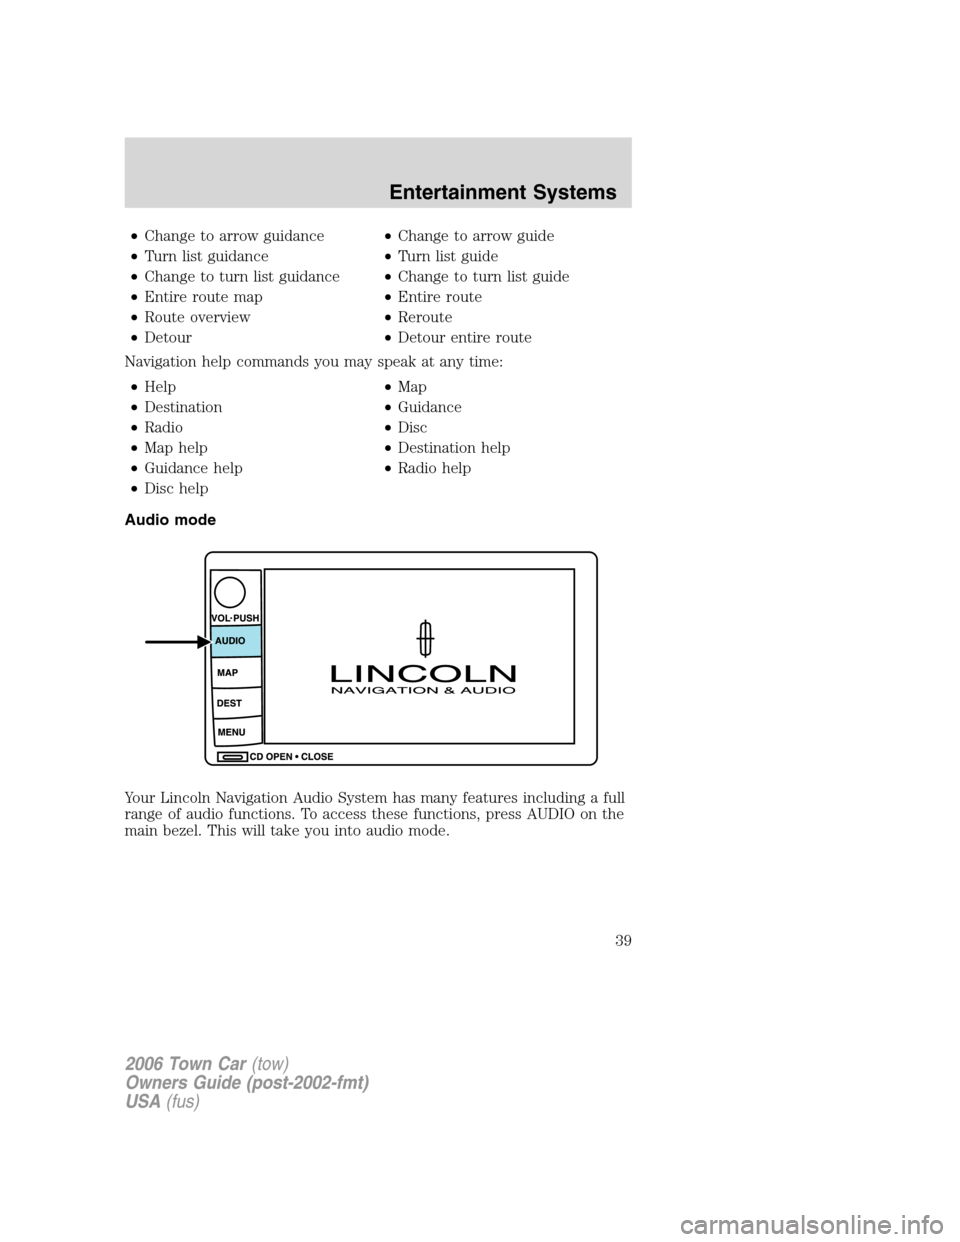 LINCOLN TOWN CAR 2006 Owners Guide •Change to arrow guidance•Change to arrow guide
•Turn list guidance•Turn list guide
•Change to turn list guidance•Change to turn list guide
•Entire route map•Entire route
•Route over